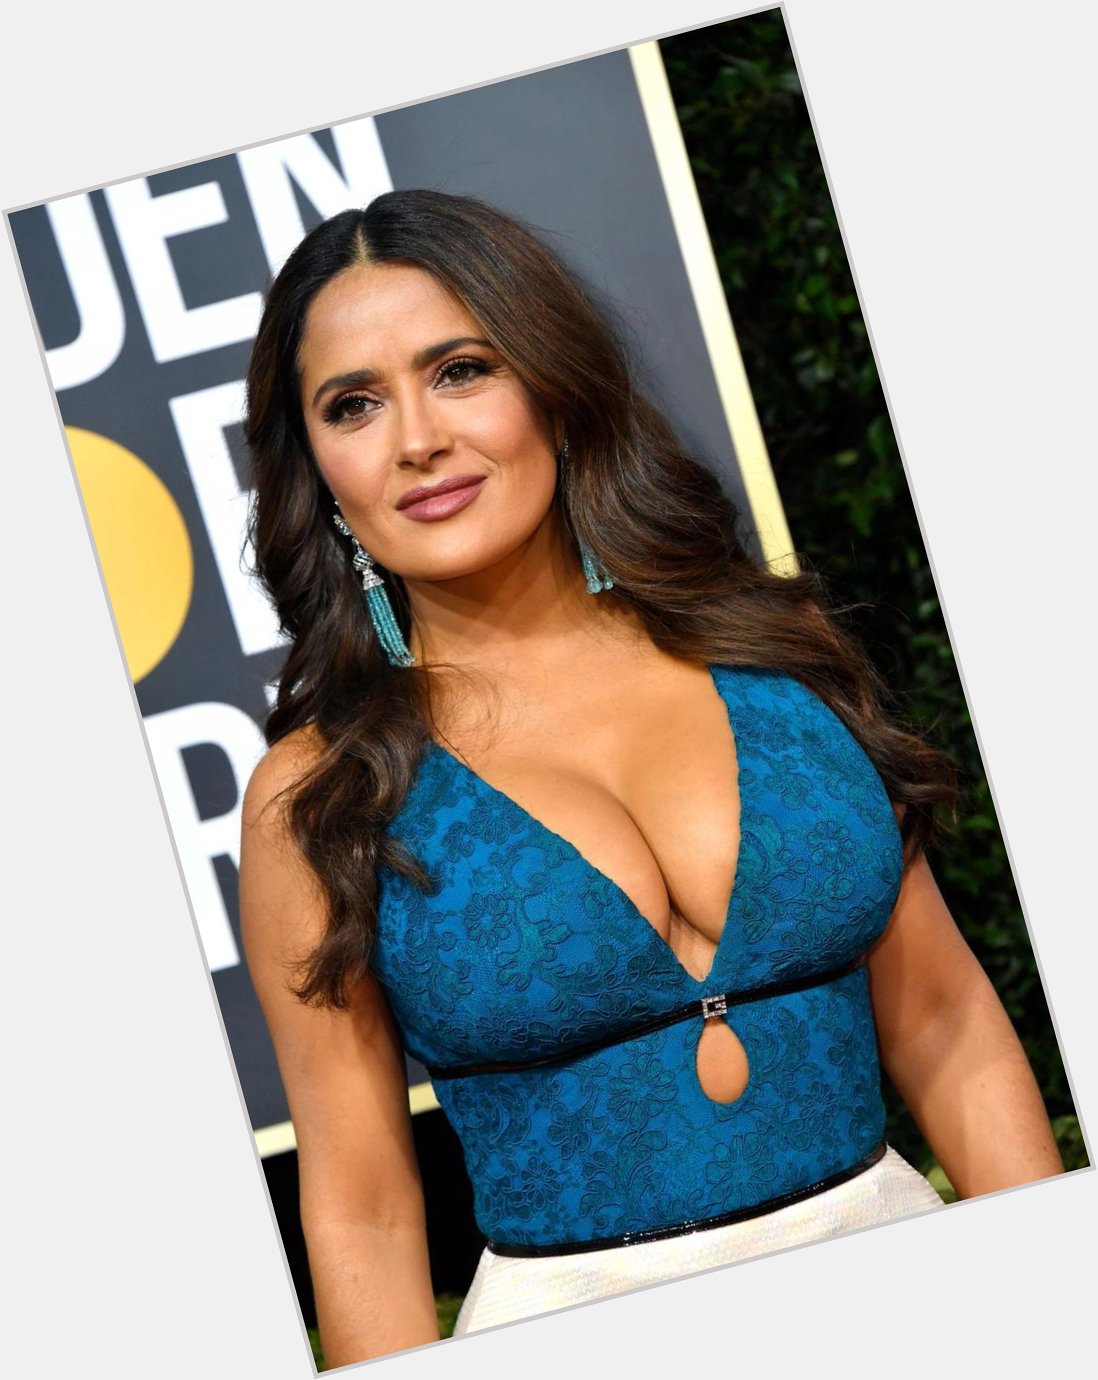 Happy 54th Birthday to Salma Hayek What s your favorite movie role she s been in? 